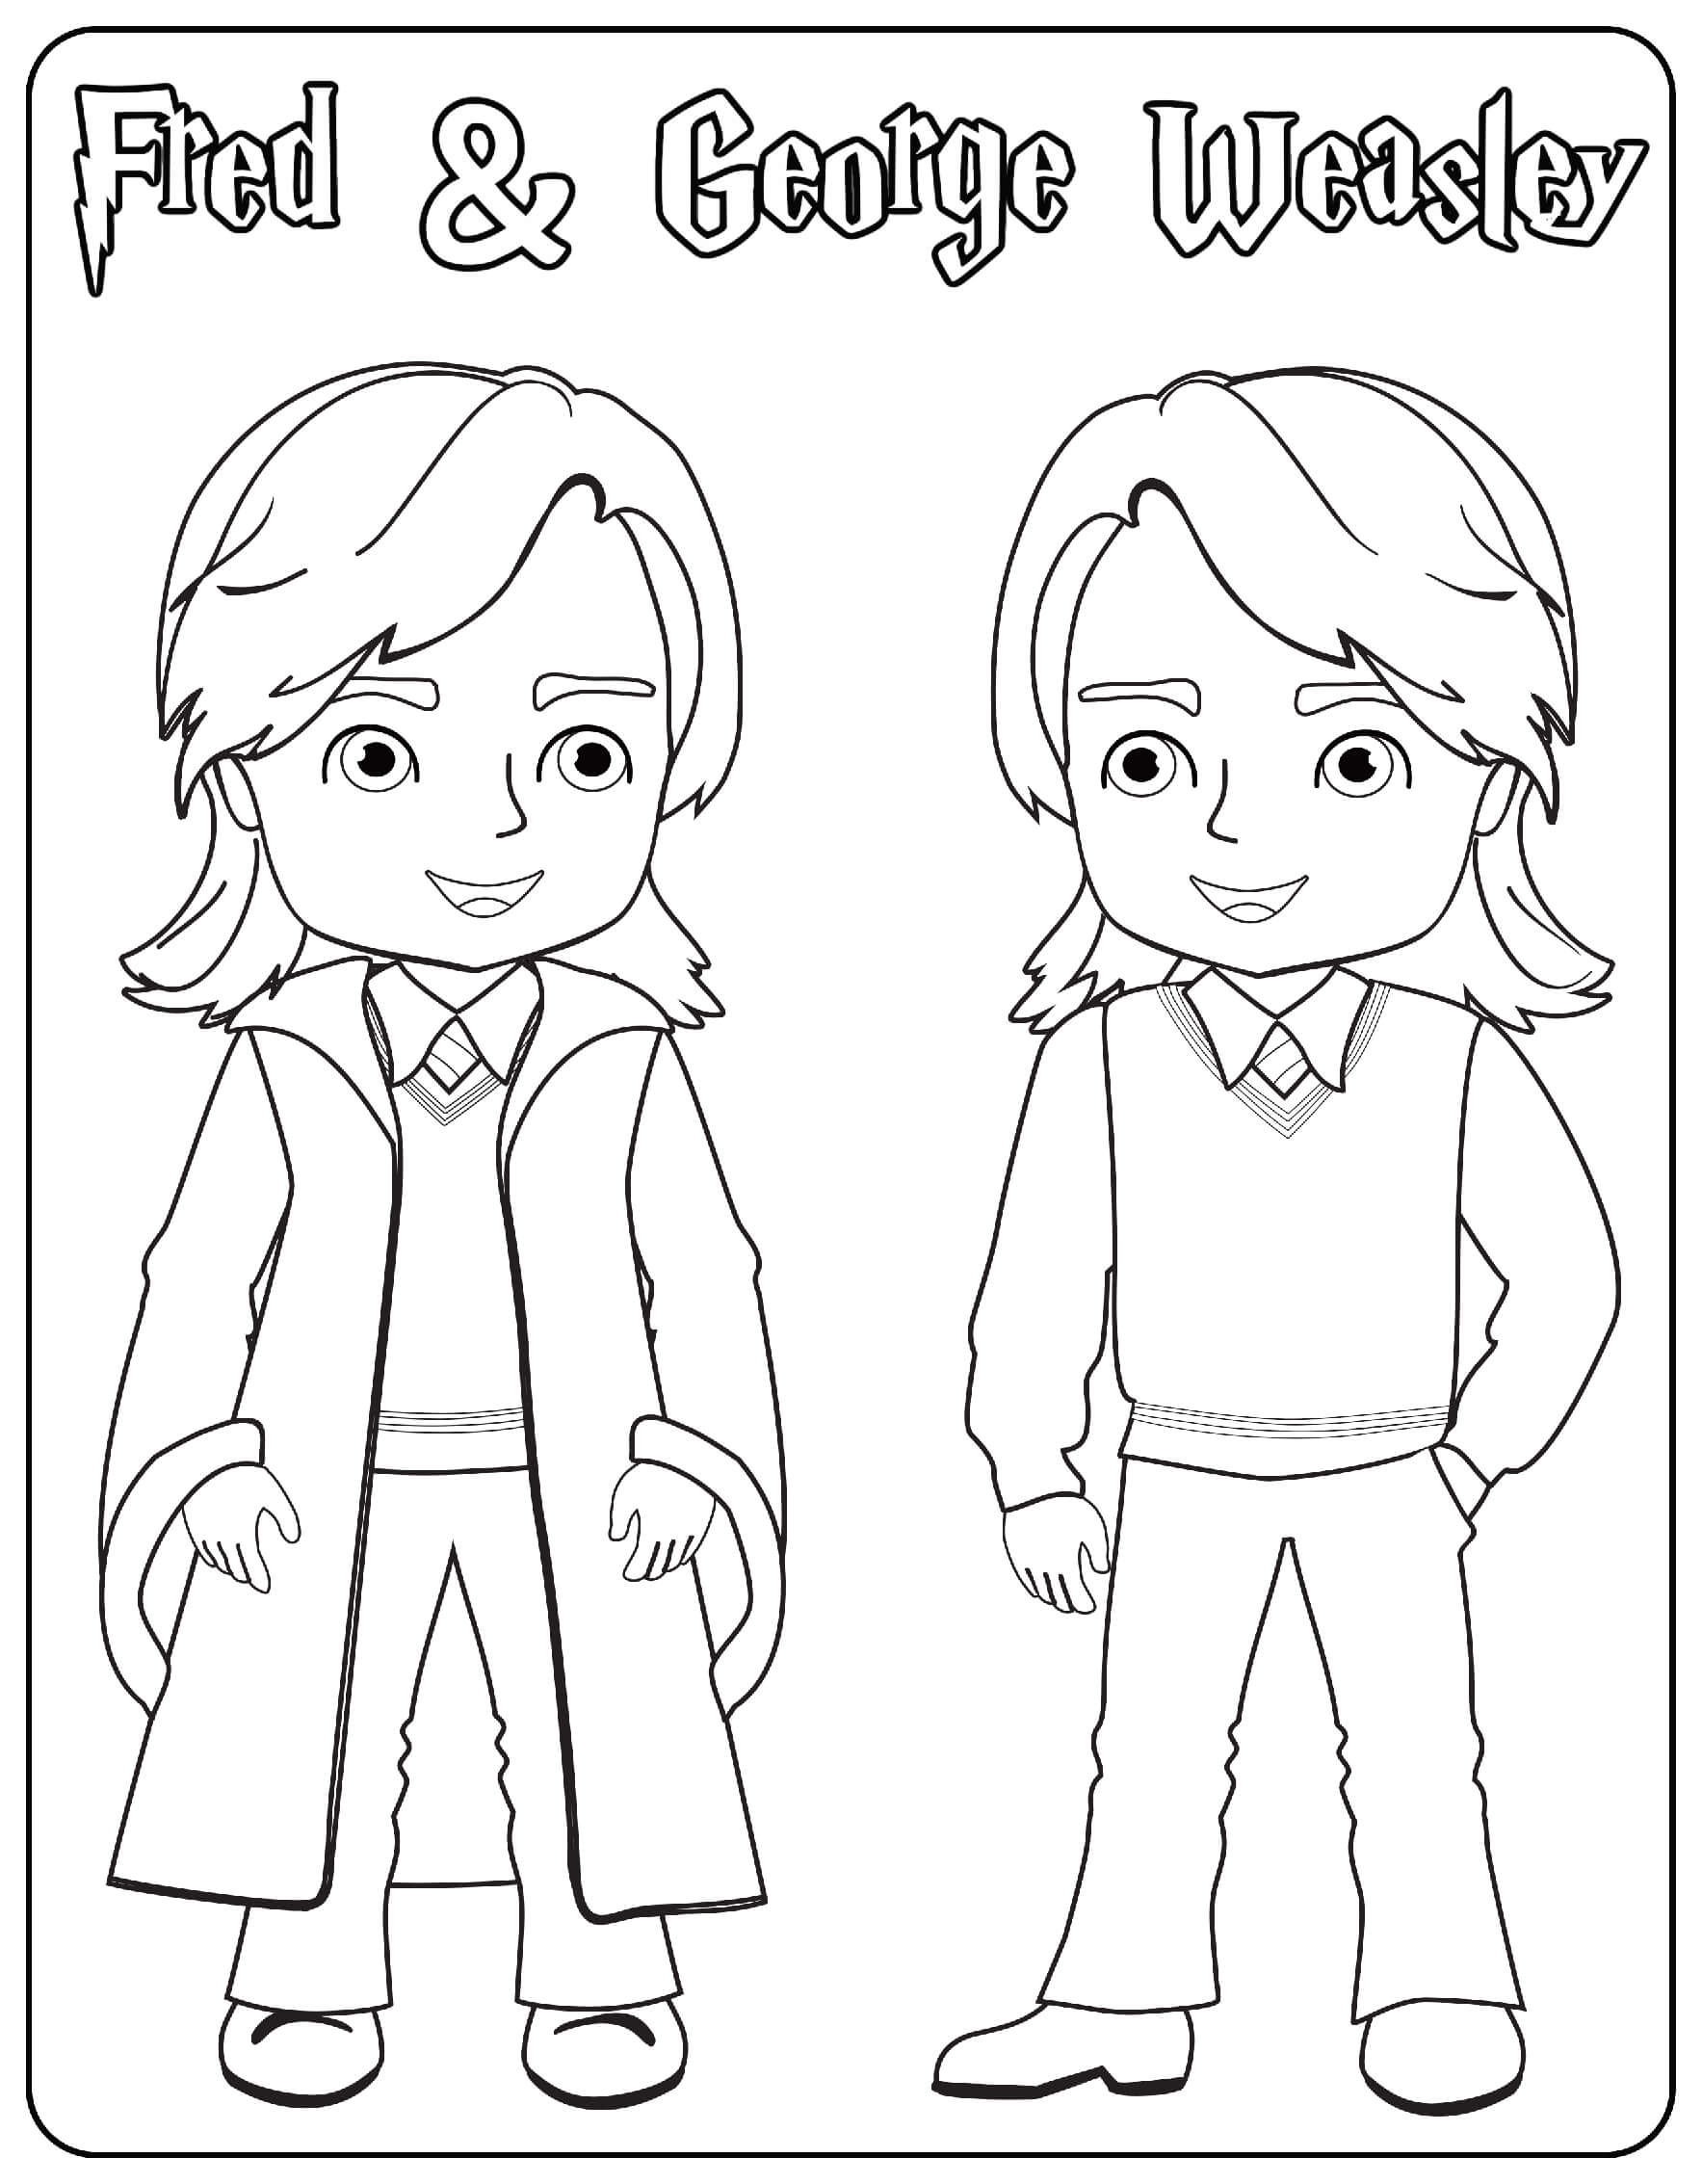 Fred And George Weasley Coloring Page